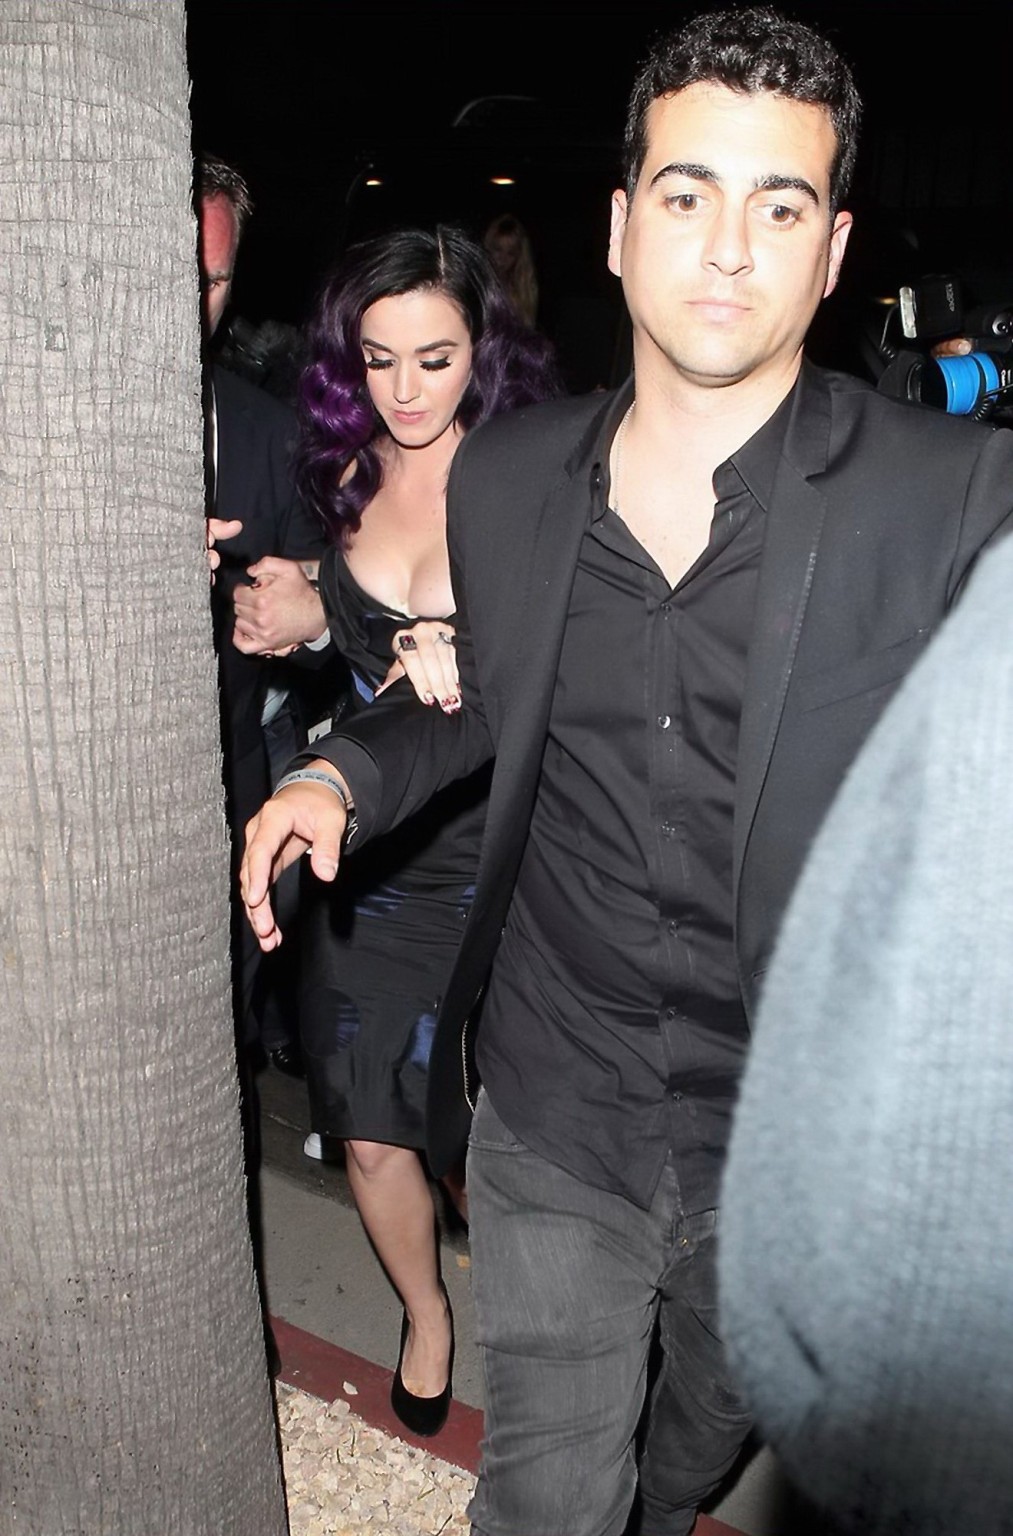 Katy Perry downtop wearing a strapless dress in Hollywood #75258748